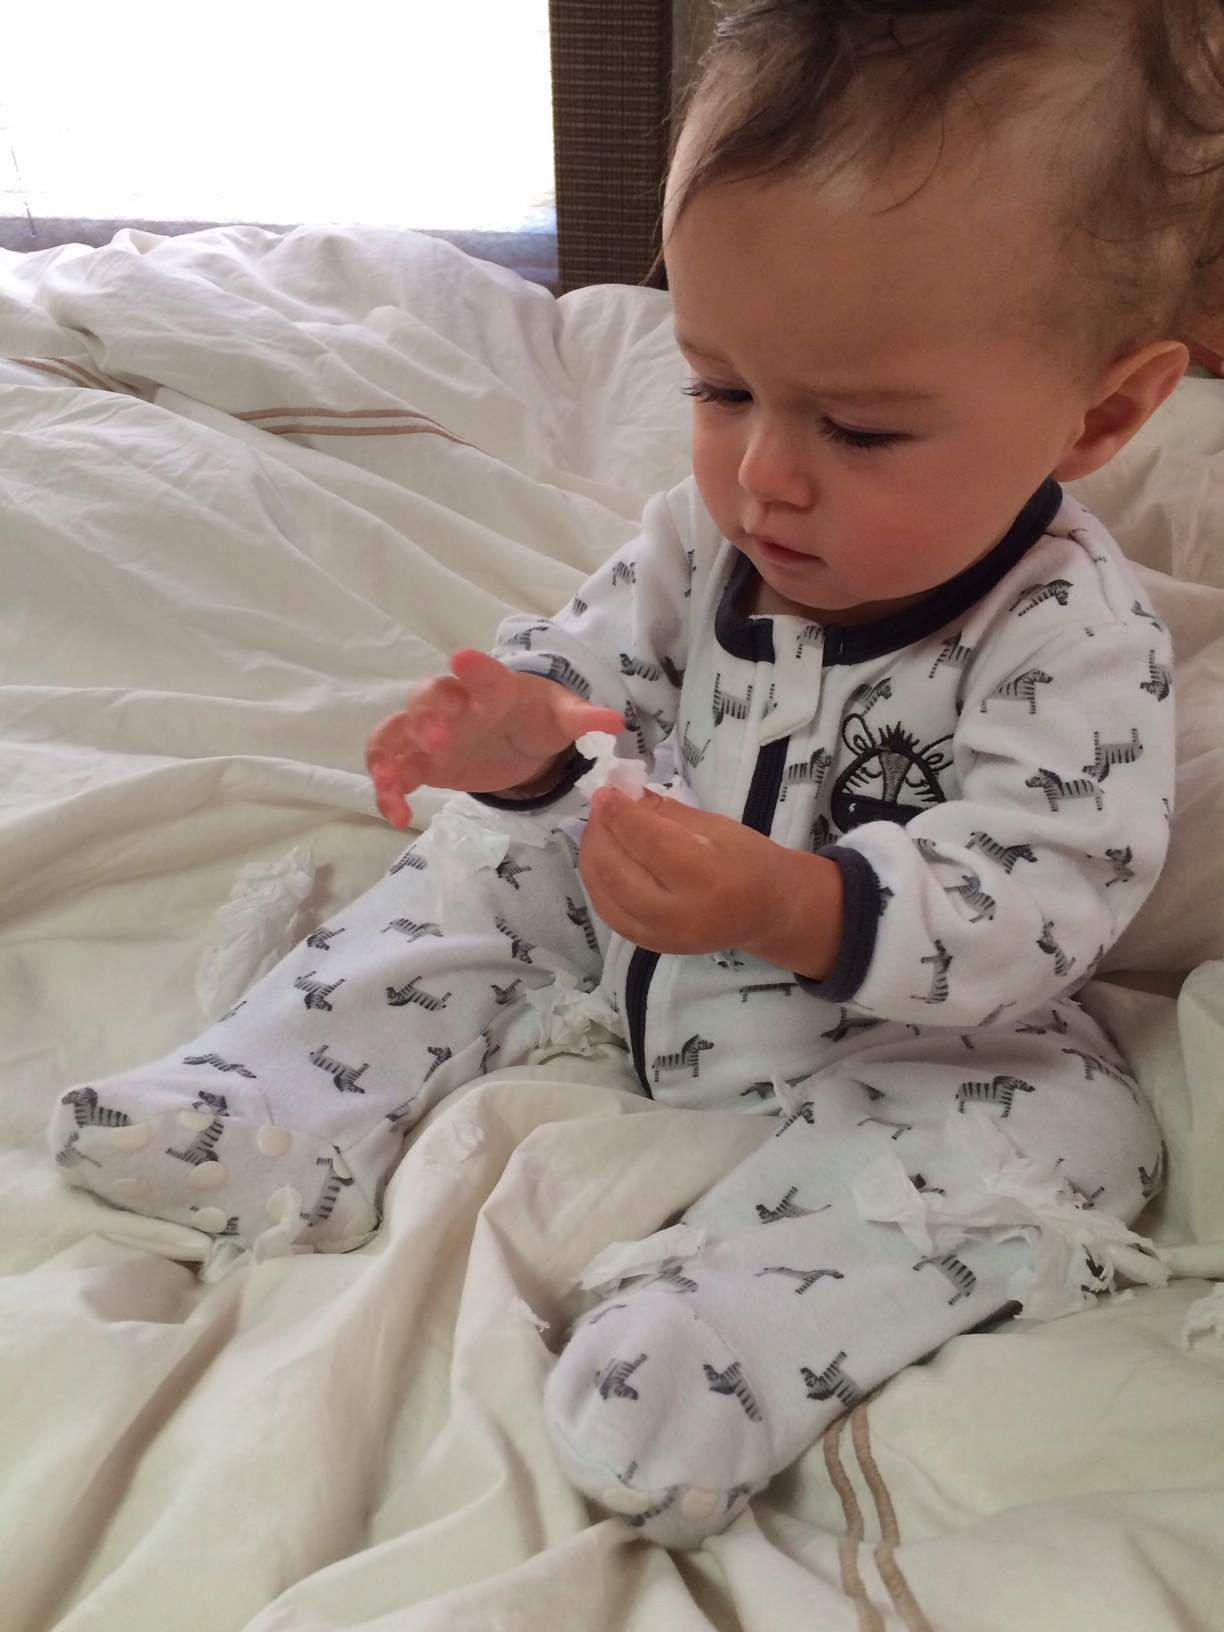 Baby boy o tearing tissue in bed